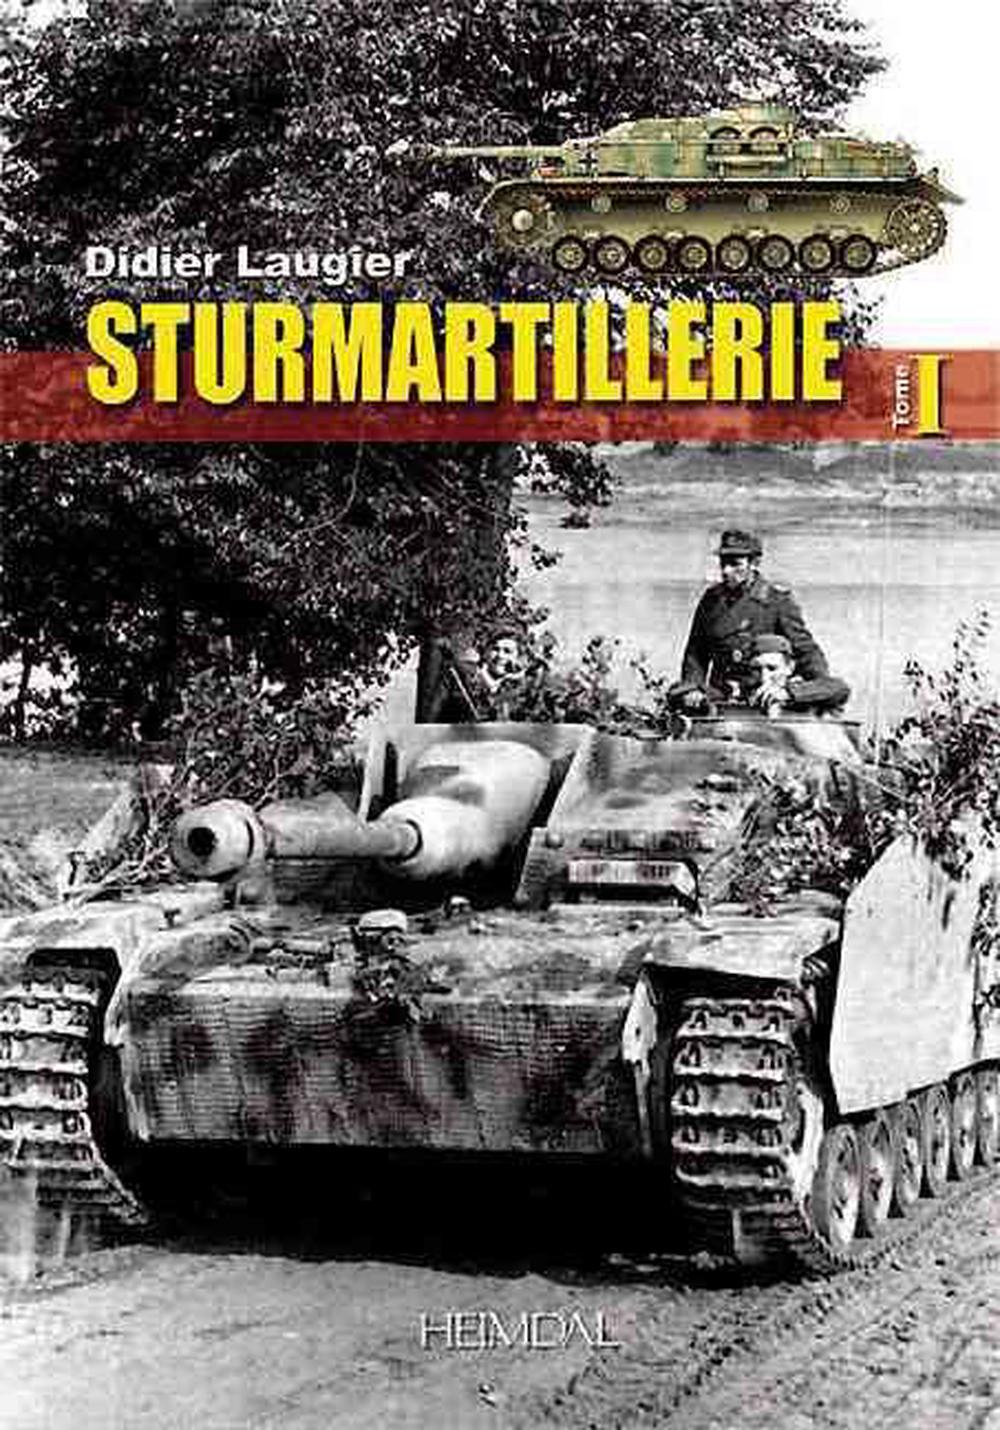 Sturmartillerie by Didier Laugier, Hardcover, 9782840482857 | Buy ...